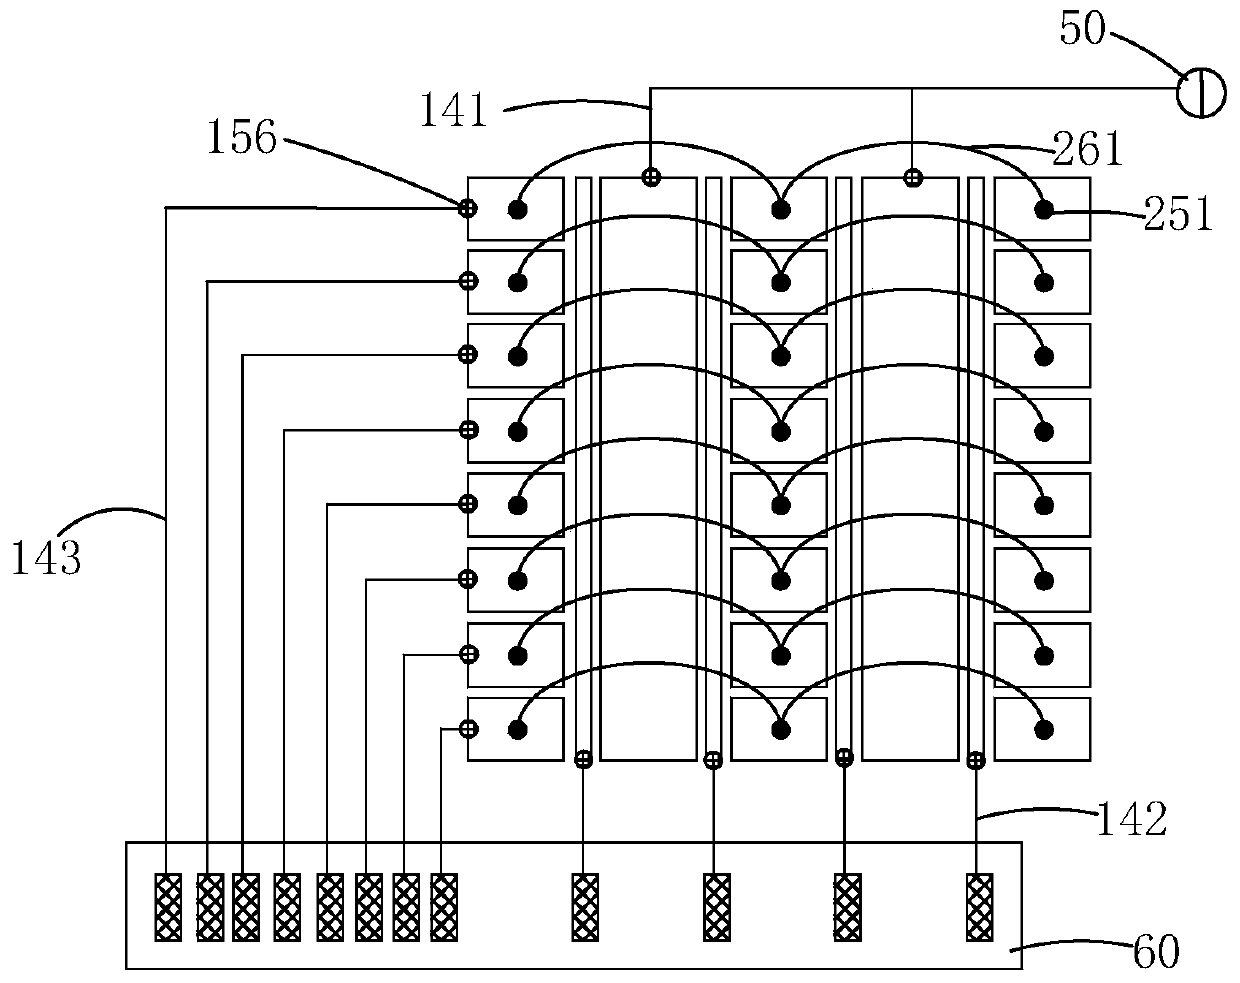 Embedded touch amoled panel structure